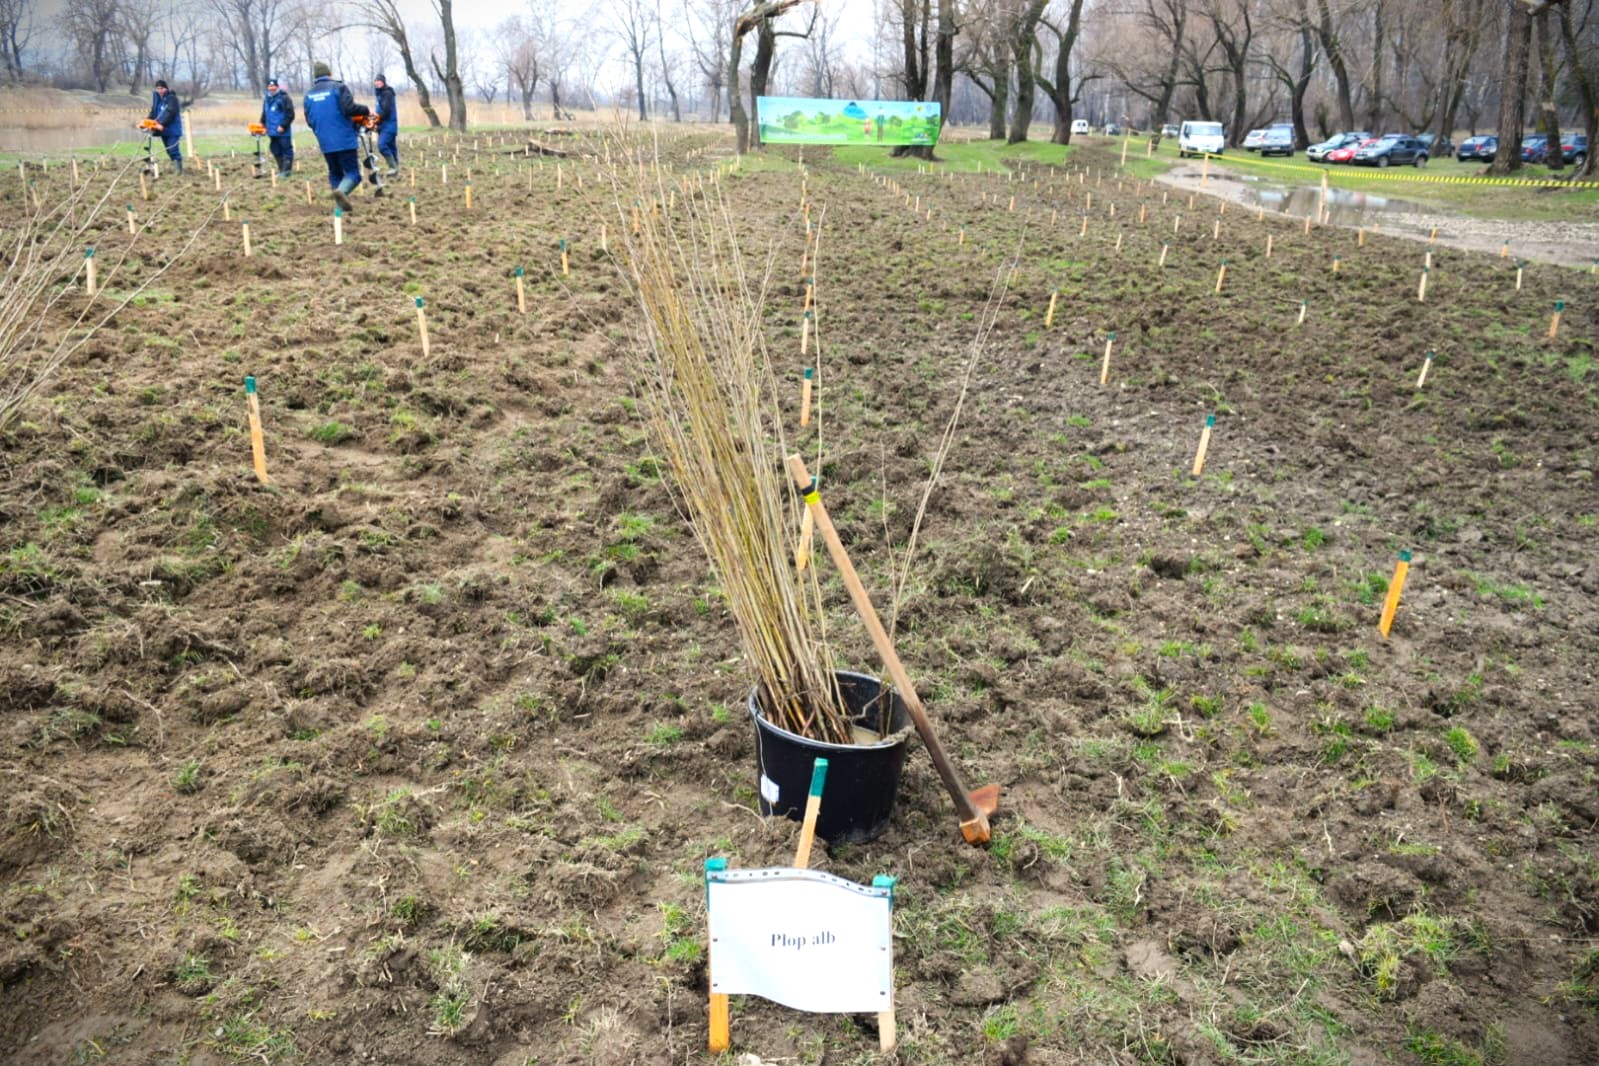 Romania’s National Forest Administration begins Tree Planting Month, plans for 26 million saplings planted